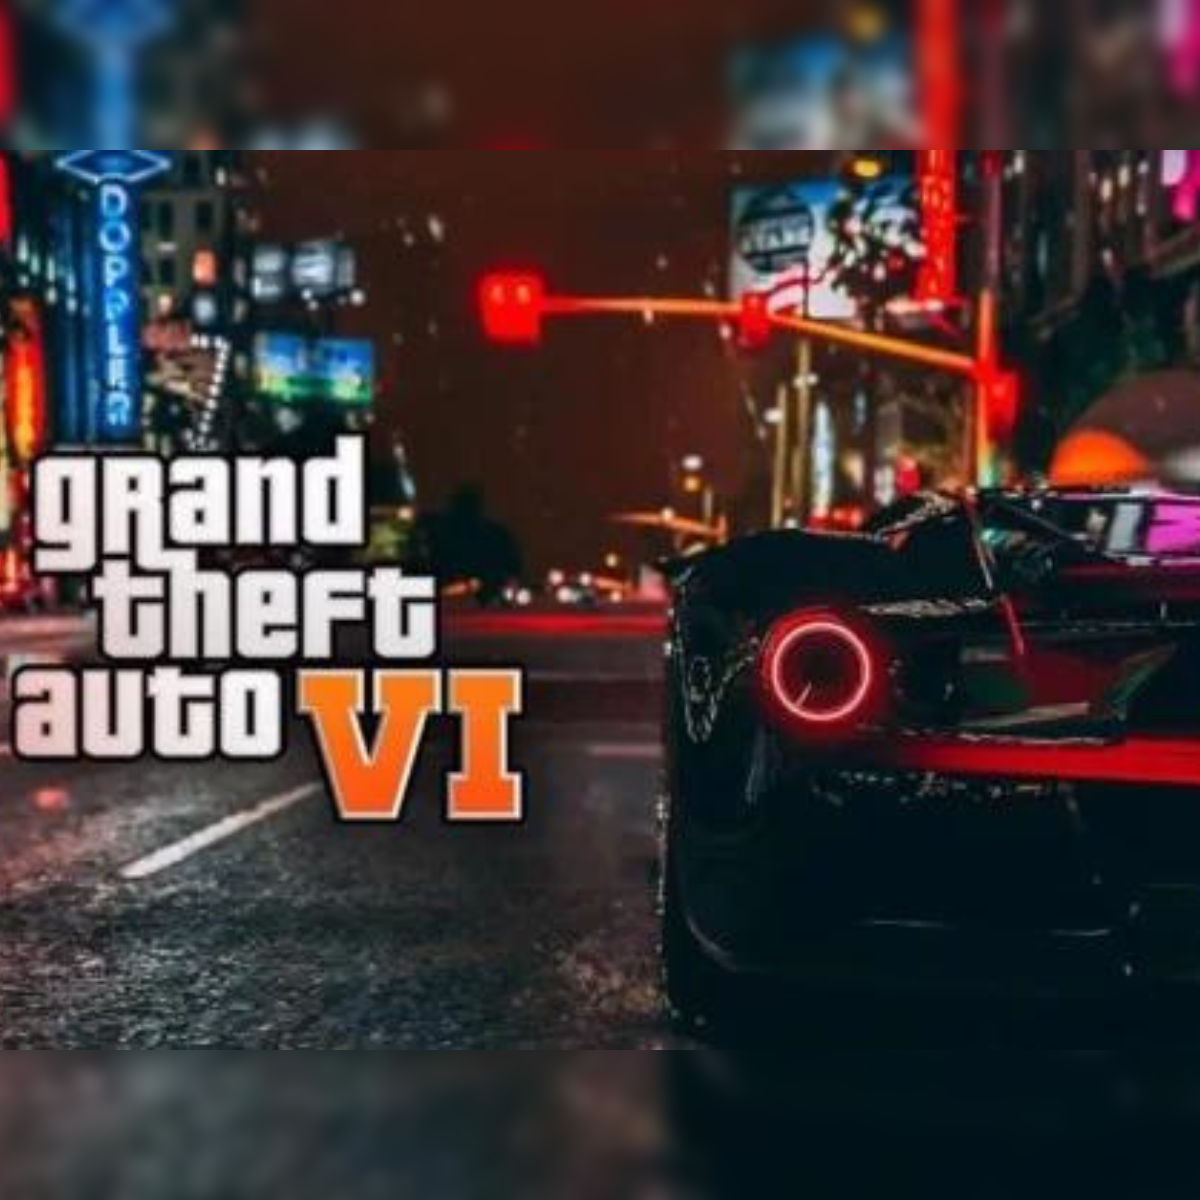 gta vi: Excitement peaks as GTA VI takes realism to 'insanely good' levels  - The Economic Times